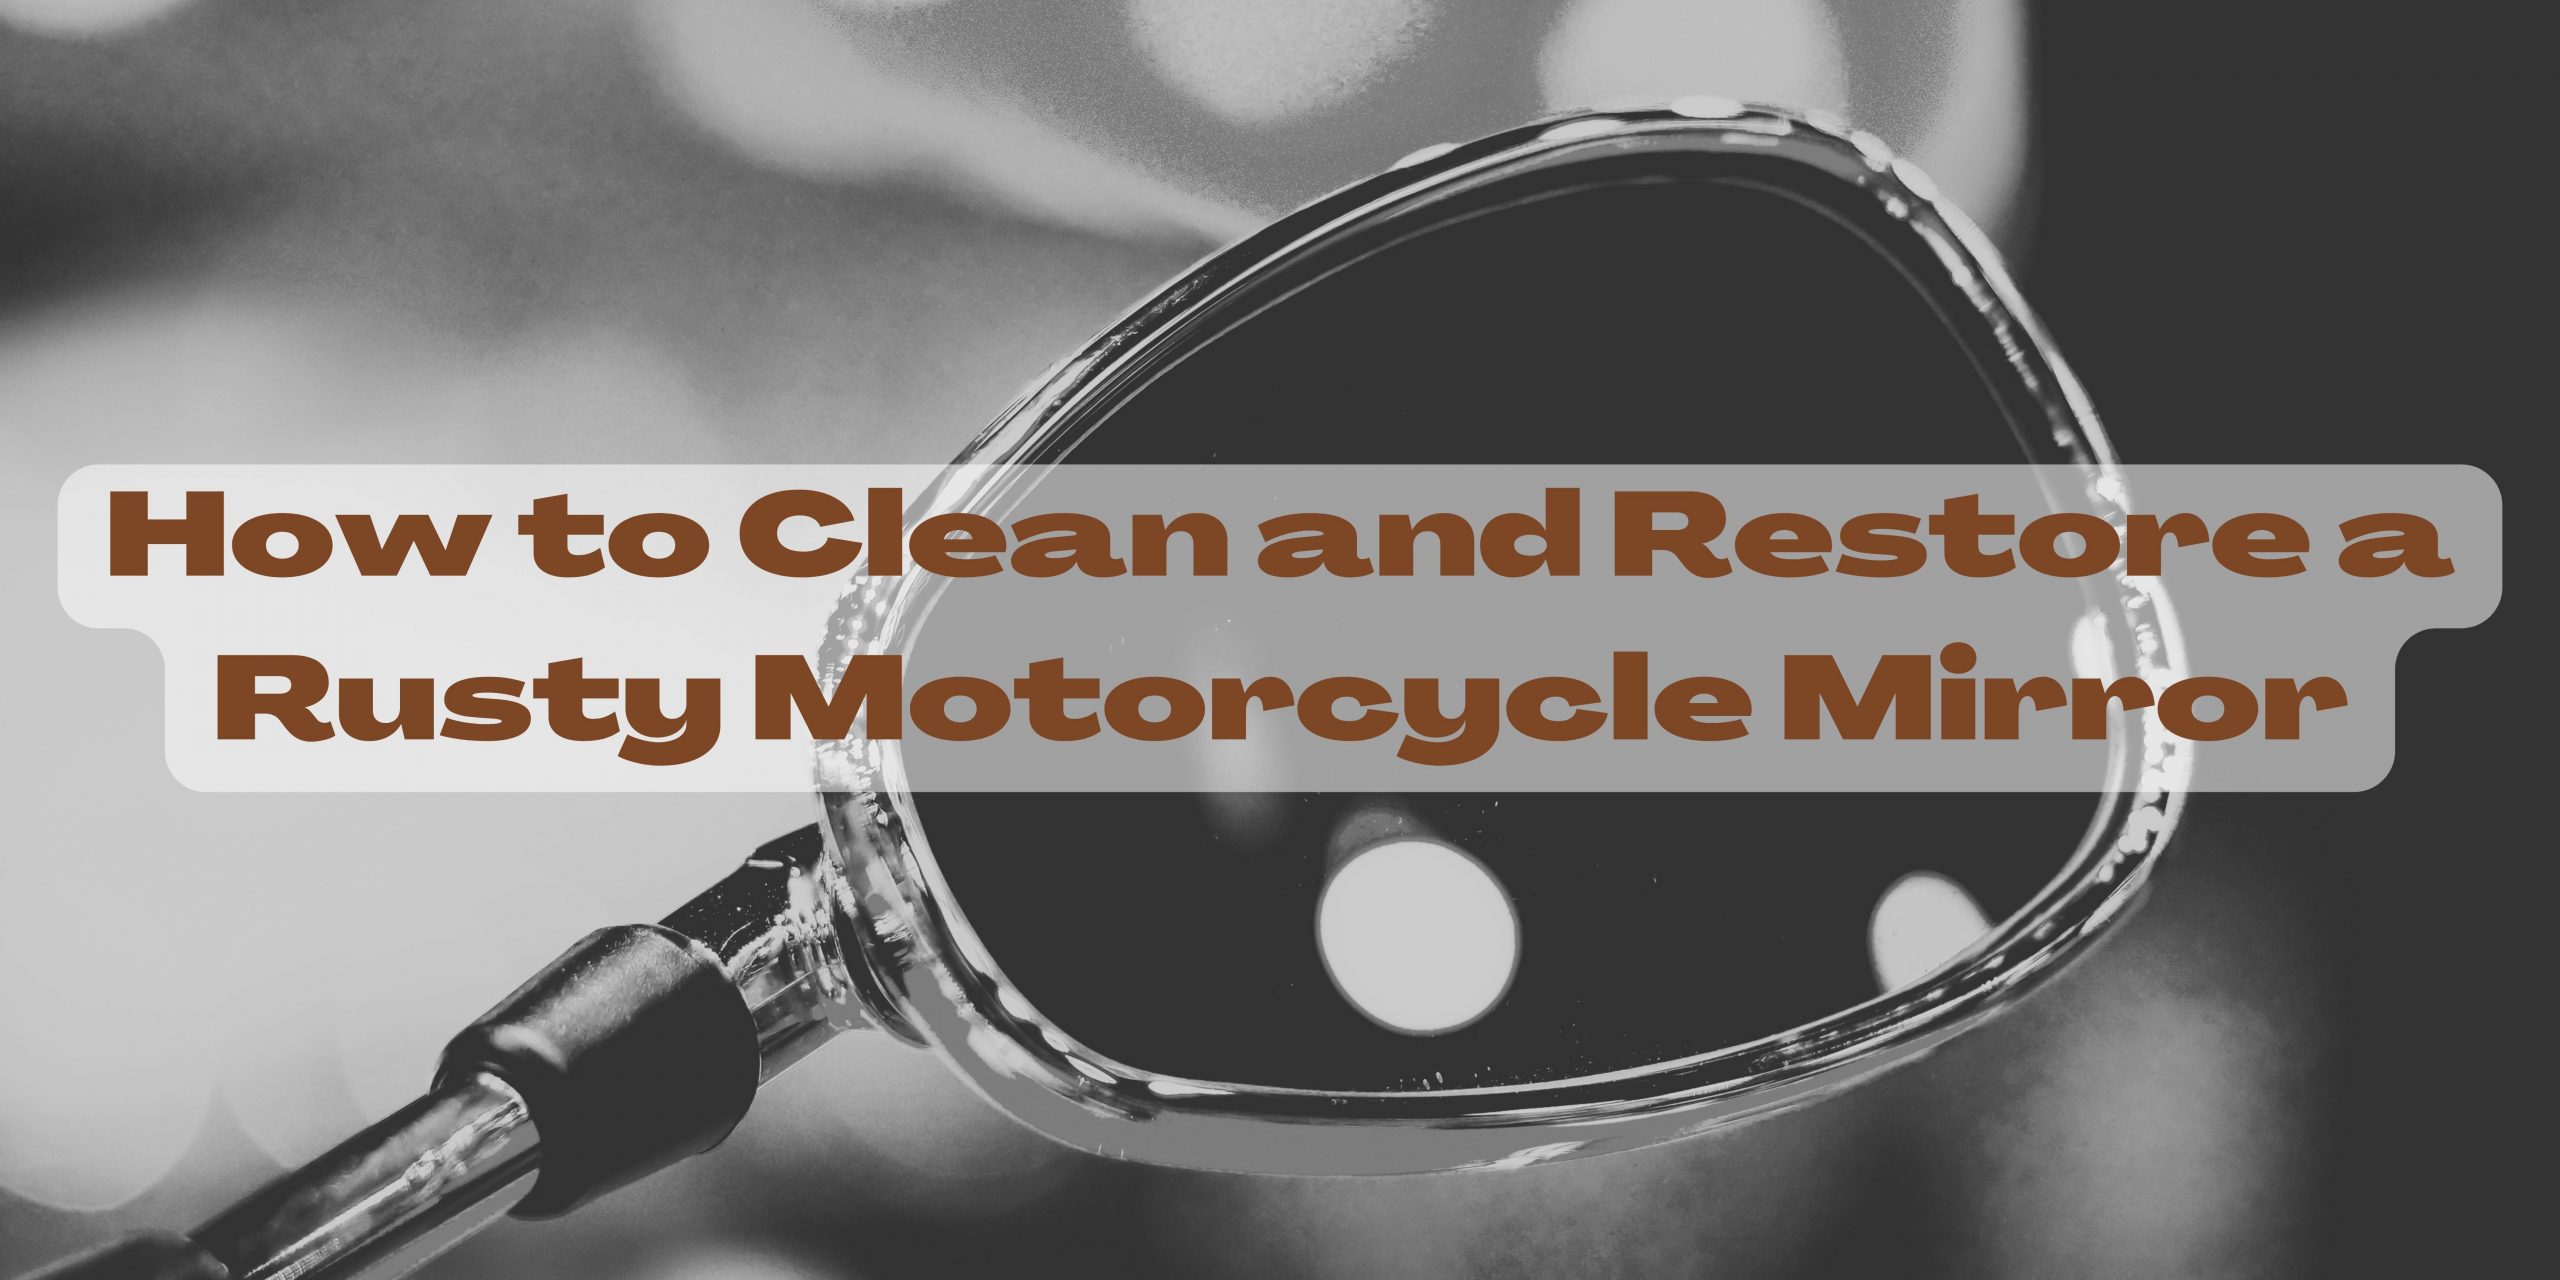 You are currently viewing How to Clean and Restore a Rusty Motorcycle Mirror